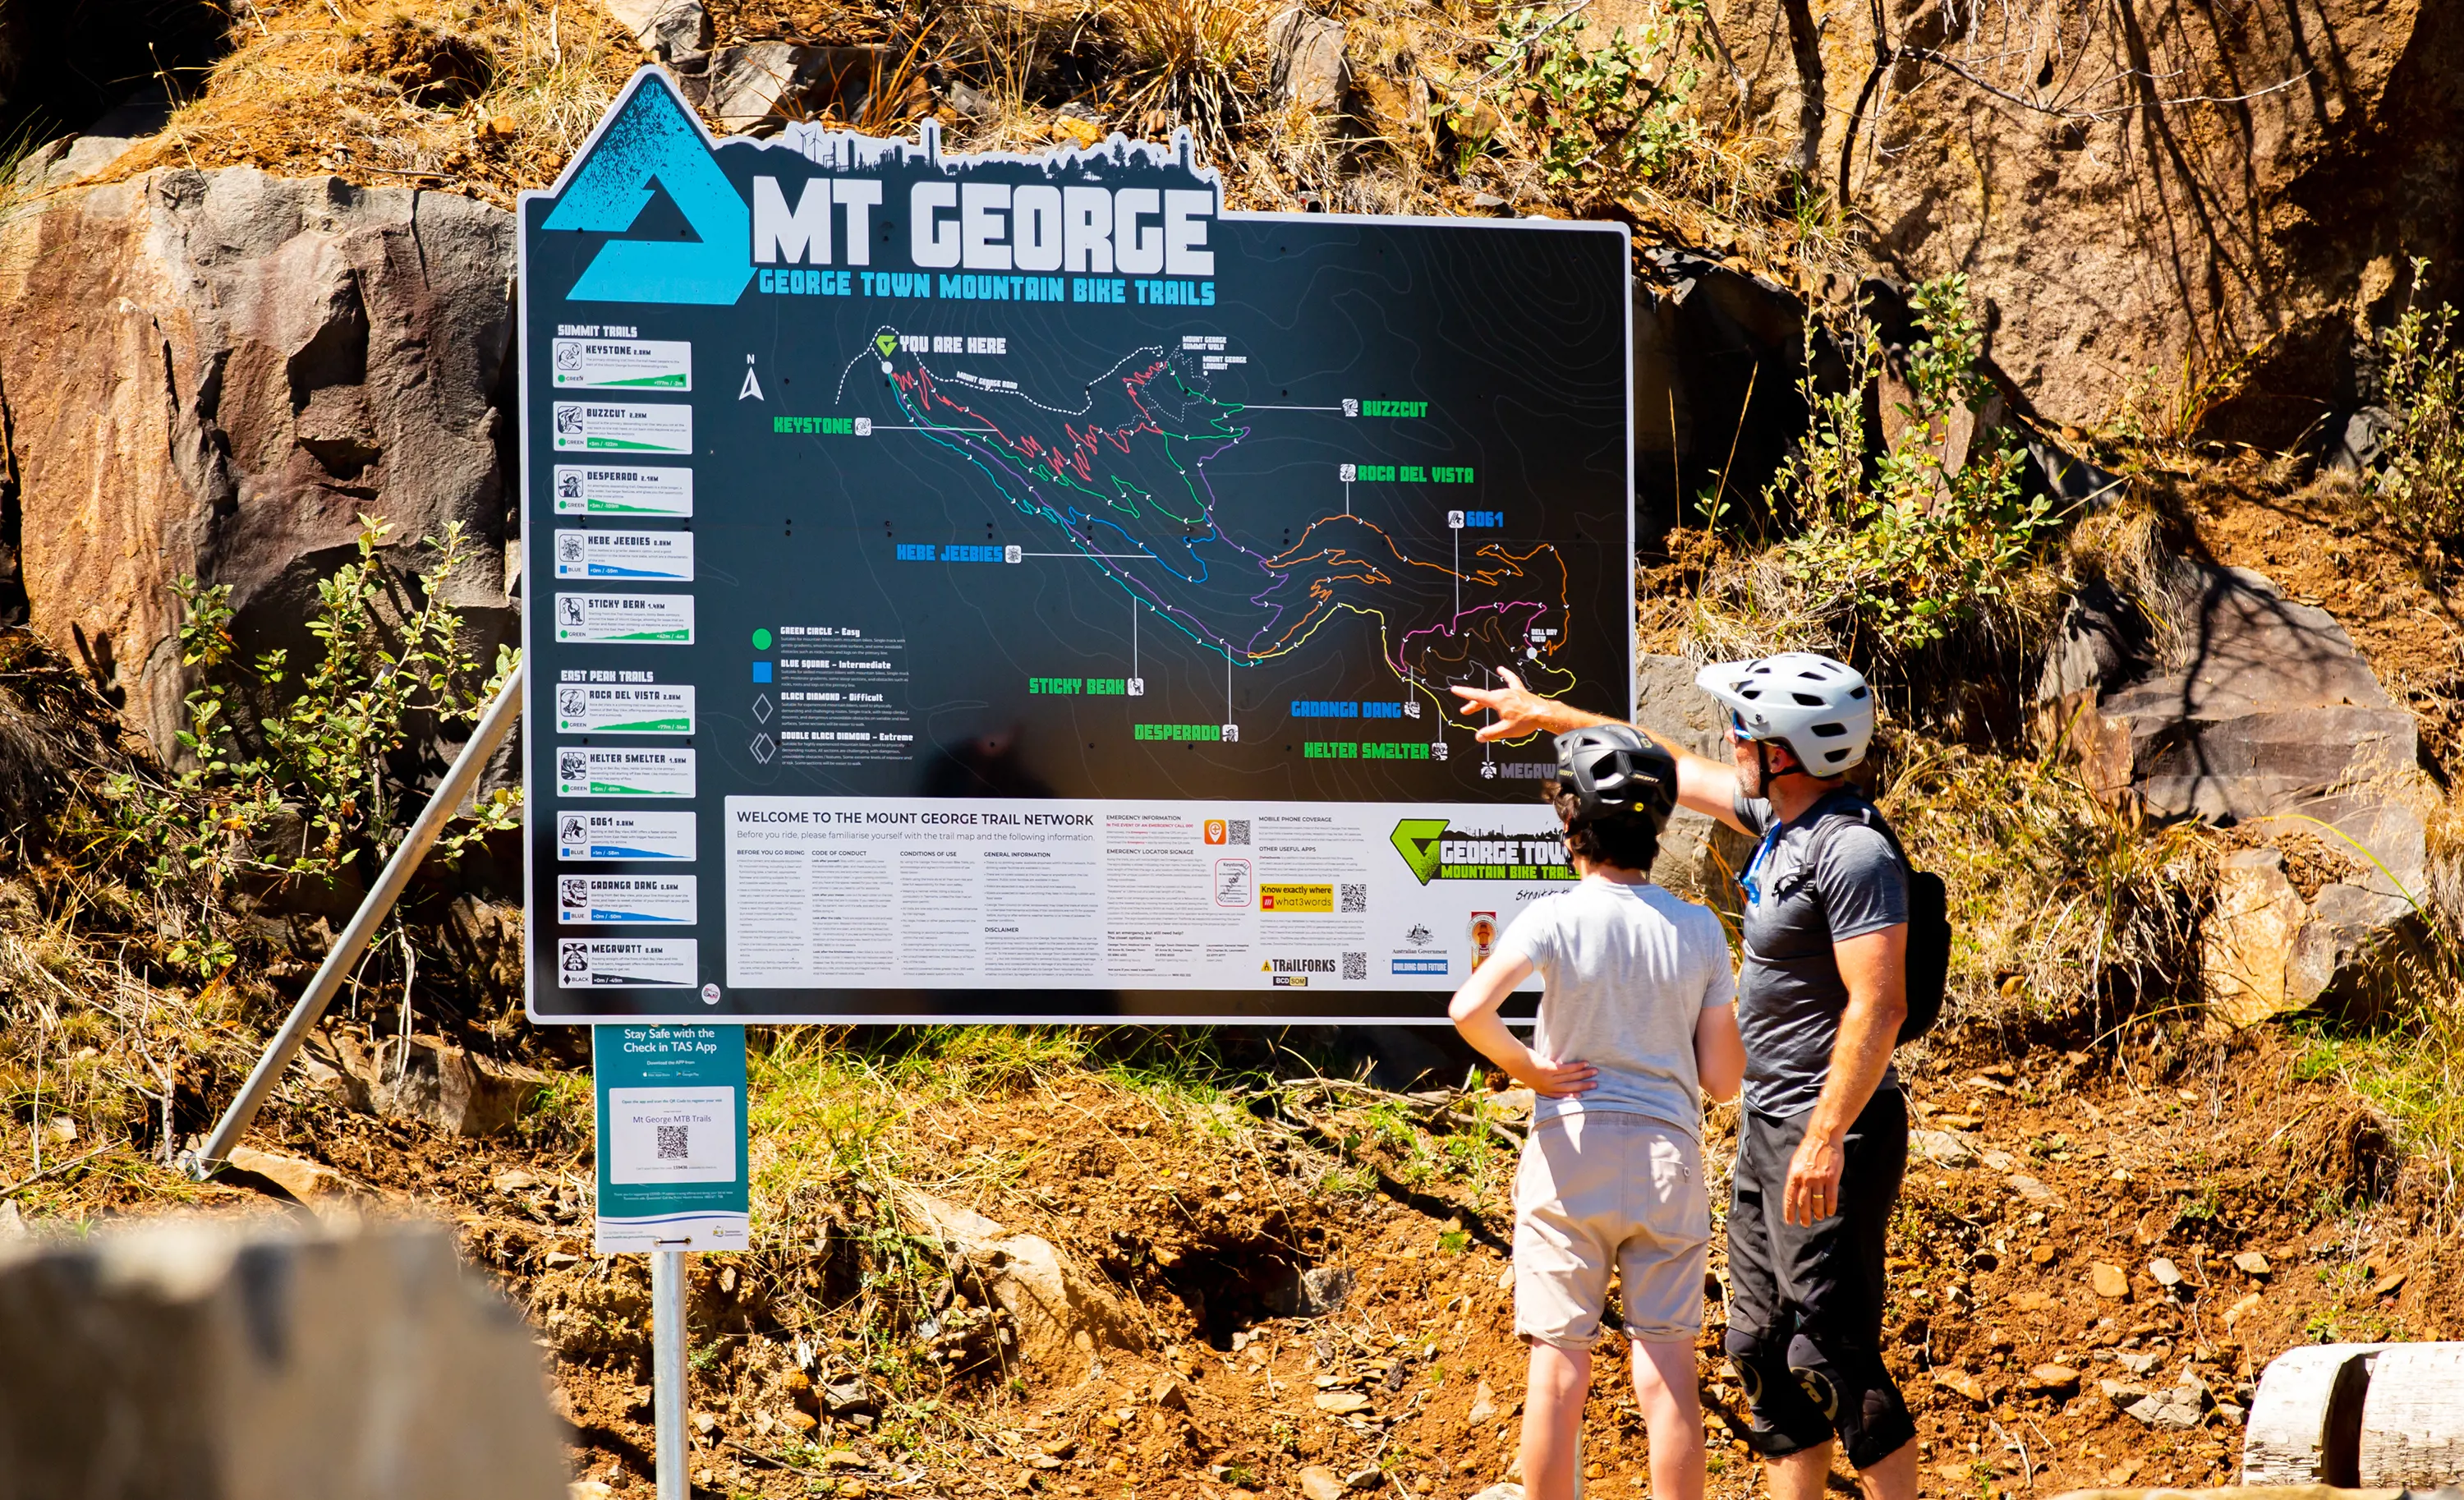 A father and sun stand in front of a large sign displaying a track map at Mt George.